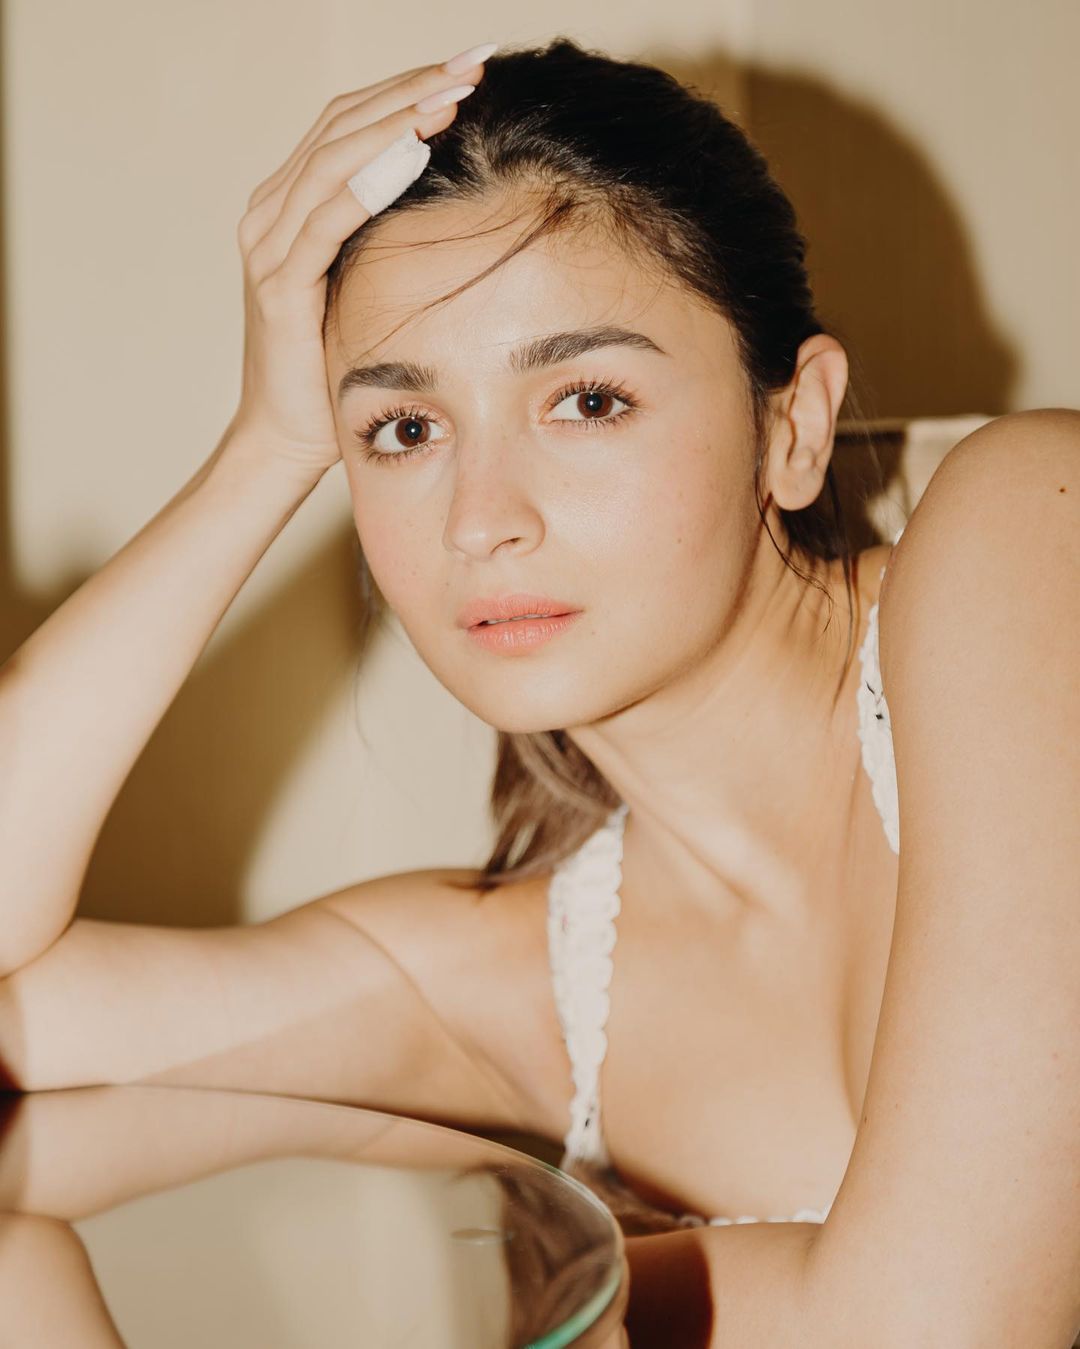 Alia Bhatt looks breathtaking in the barely-there makeup